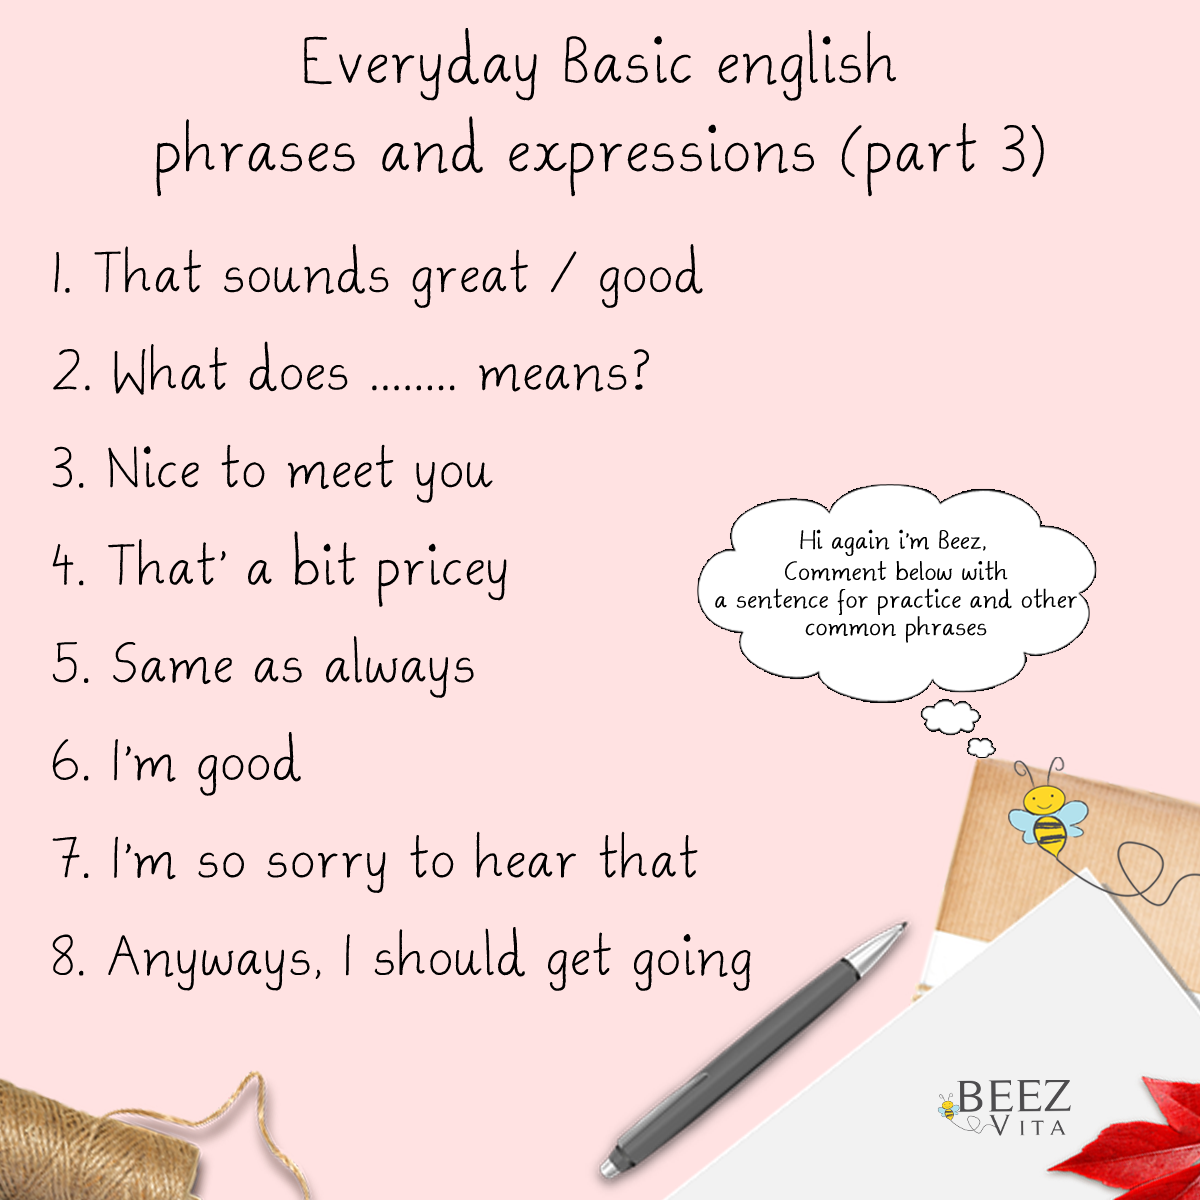 Beez Vita: Everyday Basic english phrases and expressions part 3